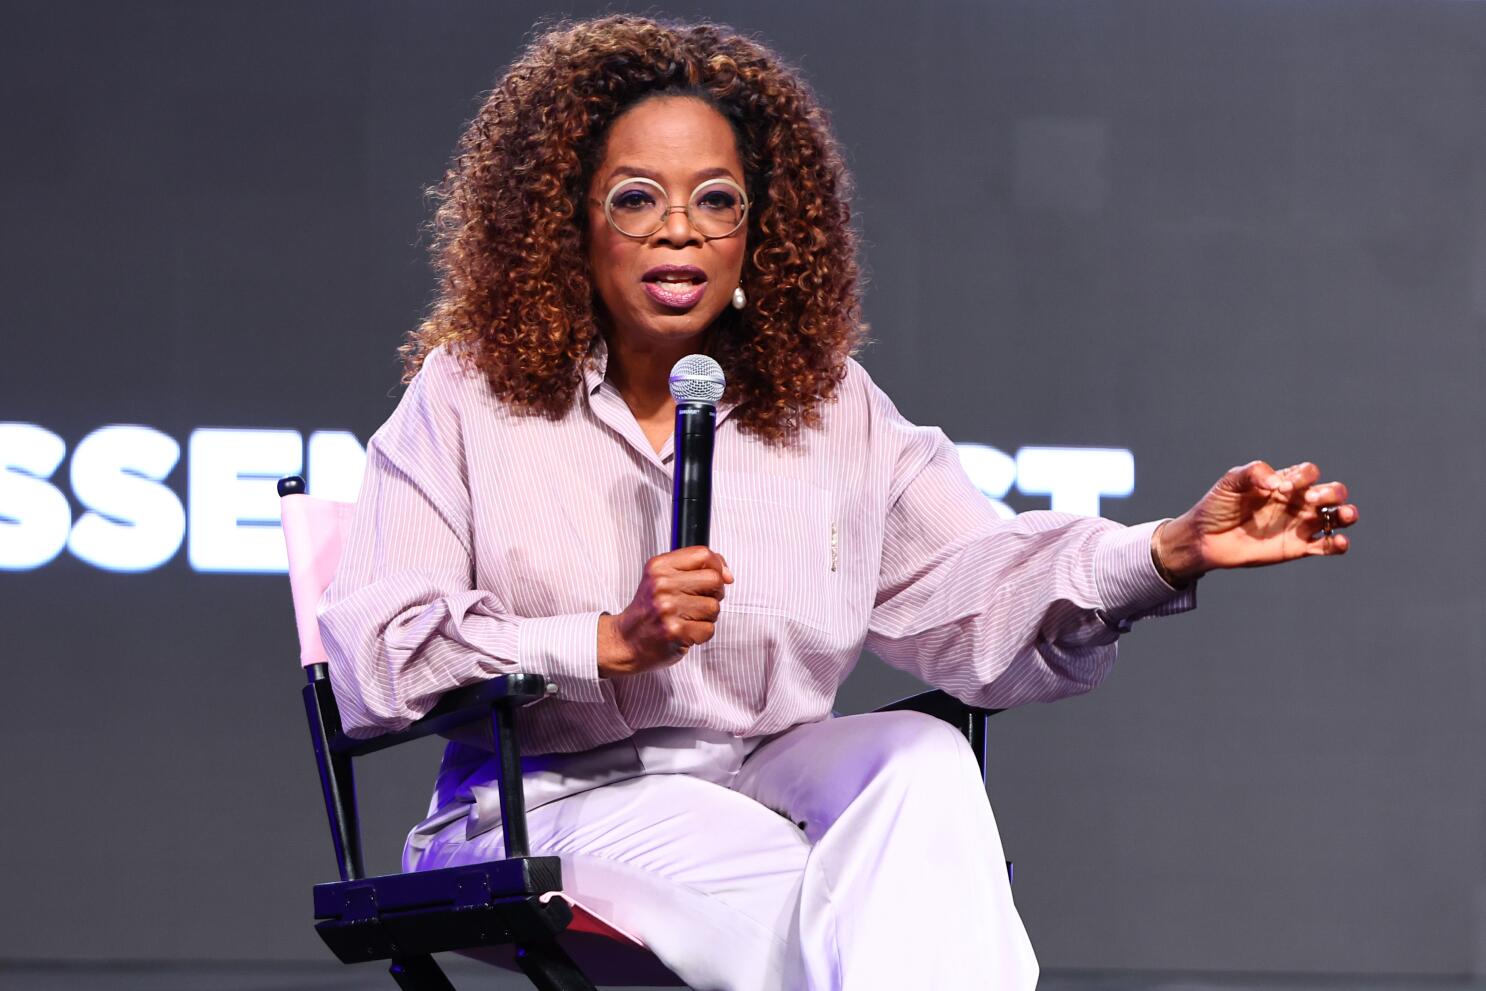  Oprah Winfrey to Go Without Party for 70th Birthday: Here’s Why